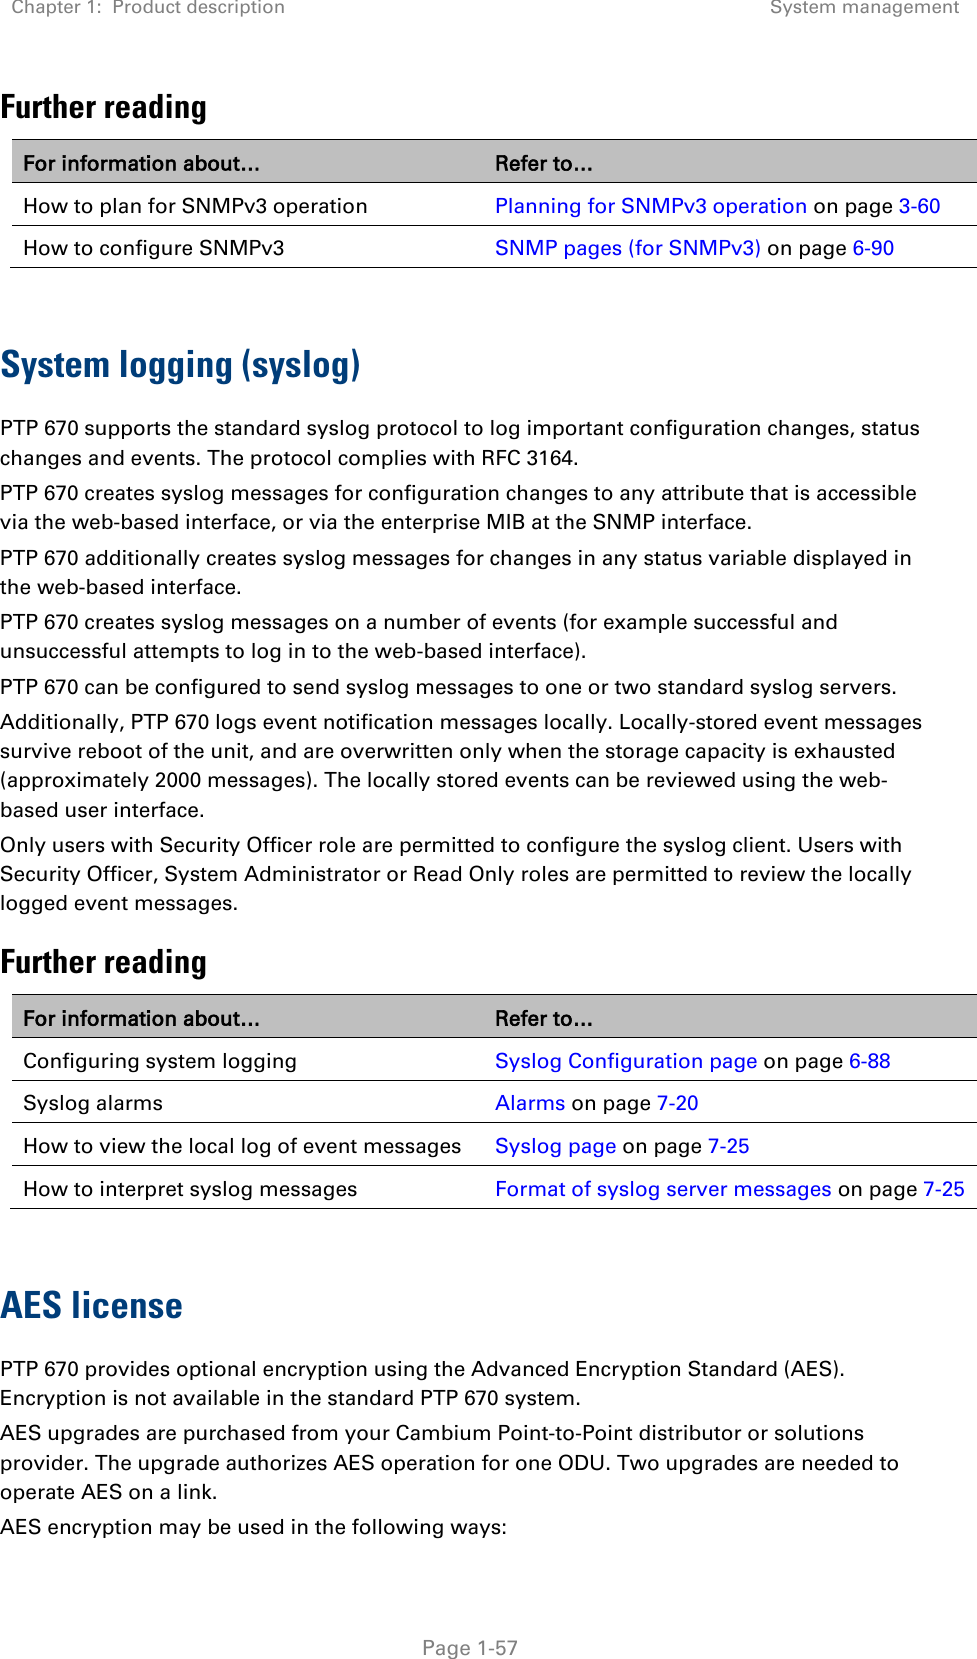 Chapter 1:  Product description System management   Page 1-57 Further reading For information about… Refer to… How to plan for SNMPv3 operation Planning for SNMPv3 operation on page 3-60 How to configure SNMPv3 SNMP pages (for SNMPv3) on page 6-90   System logging (syslog) PTP 670 supports the standard syslog protocol to log important configuration changes, status changes and events. The protocol complies with RFC 3164. PTP 670 creates syslog messages for configuration changes to any attribute that is accessible via the web-based interface, or via the enterprise MIB at the SNMP interface. PTP 670 additionally creates syslog messages for changes in any status variable displayed in the web-based interface. PTP 670 creates syslog messages on a number of events (for example successful and unsuccessful attempts to log in to the web-based interface). PTP 670 can be configured to send syslog messages to one or two standard syslog servers. Additionally, PTP 670 logs event notification messages locally. Locally-stored event messages survive reboot of the unit, and are overwritten only when the storage capacity is exhausted (approximately 2000 messages). The locally stored events can be reviewed using the web-based user interface. Only users with Security Officer role are permitted to configure the syslog client. Users with Security Officer, System Administrator or Read Only roles are permitted to review the locally logged event messages. Further reading For information about… Refer to… Configuring system logging Syslog Configuration page on page 6-88 Syslog alarms Alarms on page 7-20 How to view the local log of event messages Syslog page on page 7-25 How to interpret syslog messages Format of syslog server messages on page 7-25  AES license PTP 670 provides optional encryption using the Advanced Encryption Standard (AES). Encryption is not available in the standard PTP 670 system. AES upgrades are purchased from your Cambium Point-to-Point distributor or solutions provider. The upgrade authorizes AES operation for one ODU. Two upgrades are needed to operate AES on a link. AES encryption may be used in the following ways: 